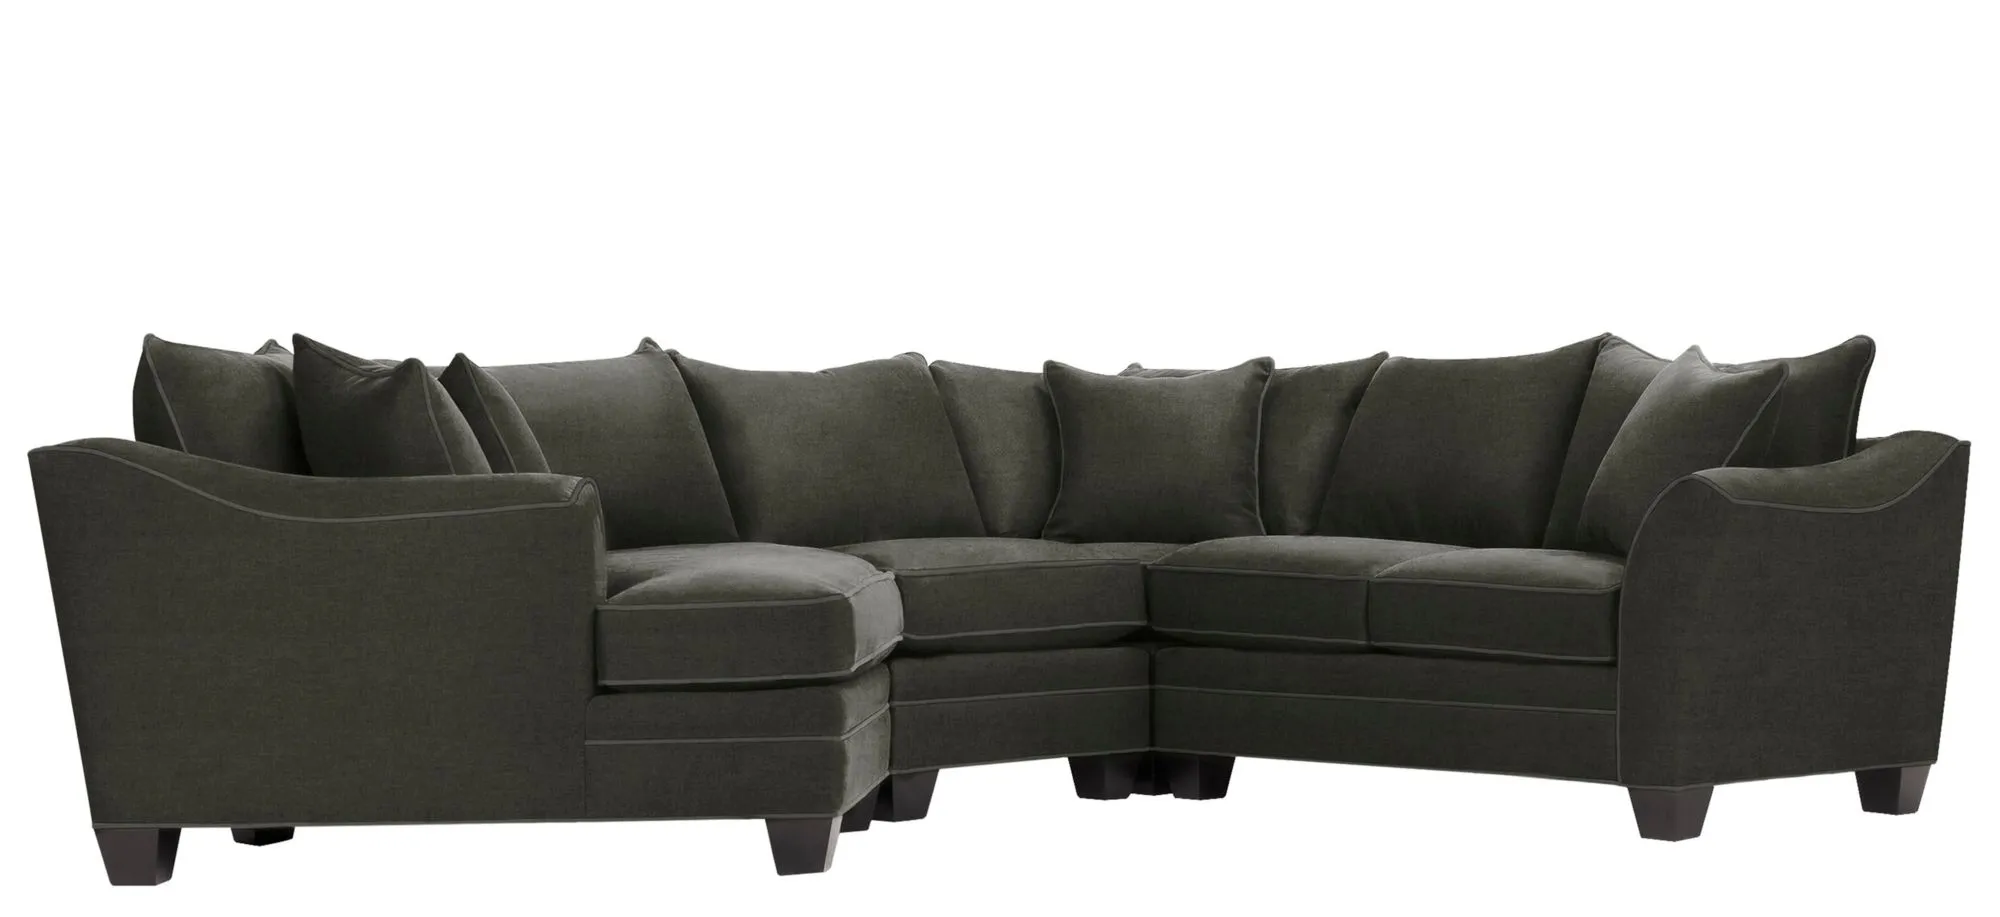 Foresthill 4-pc. Left Hand Cuddler Sectional Sofa in Santa Rosa Slate by H.M. Richards